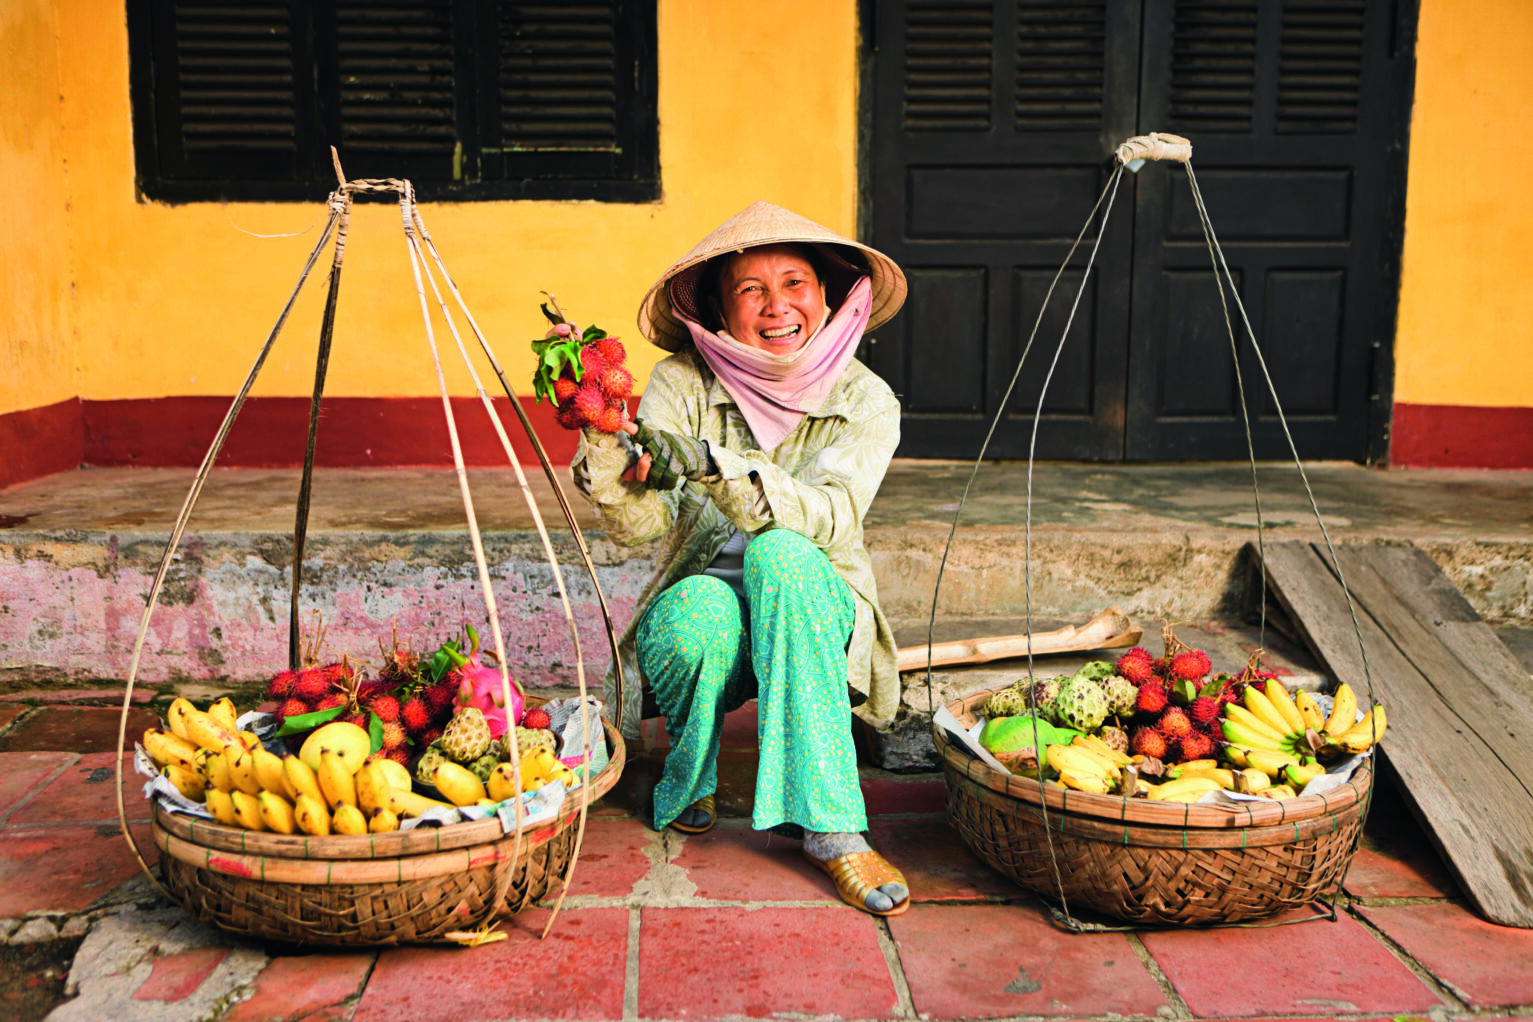 Vietnamese woman carrying fruits for sale in Hoi An town, Vietnam.